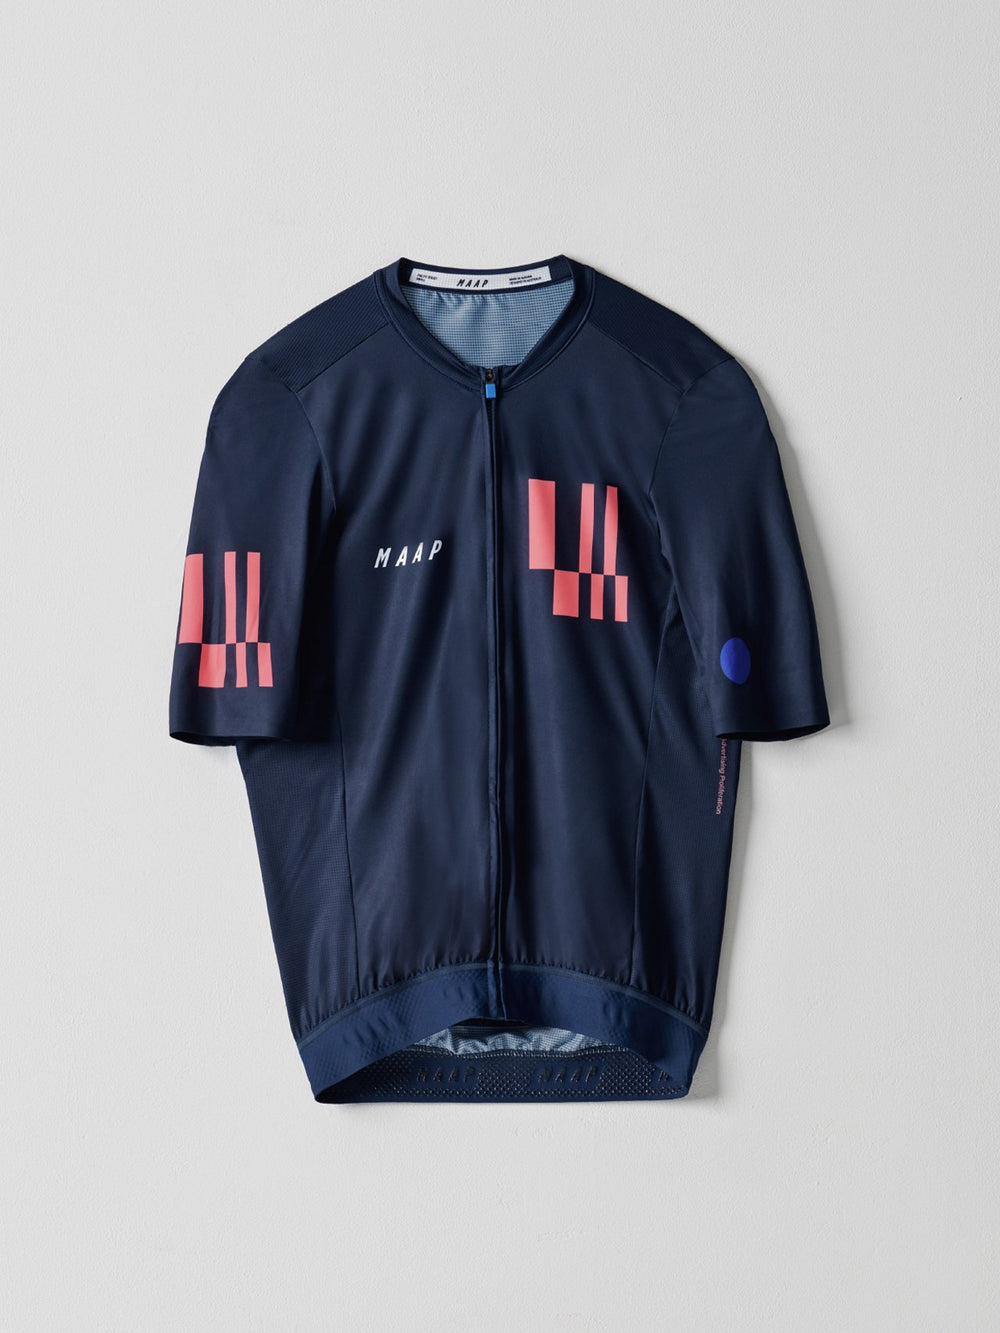 Product Image for Vapor Pro Jersey